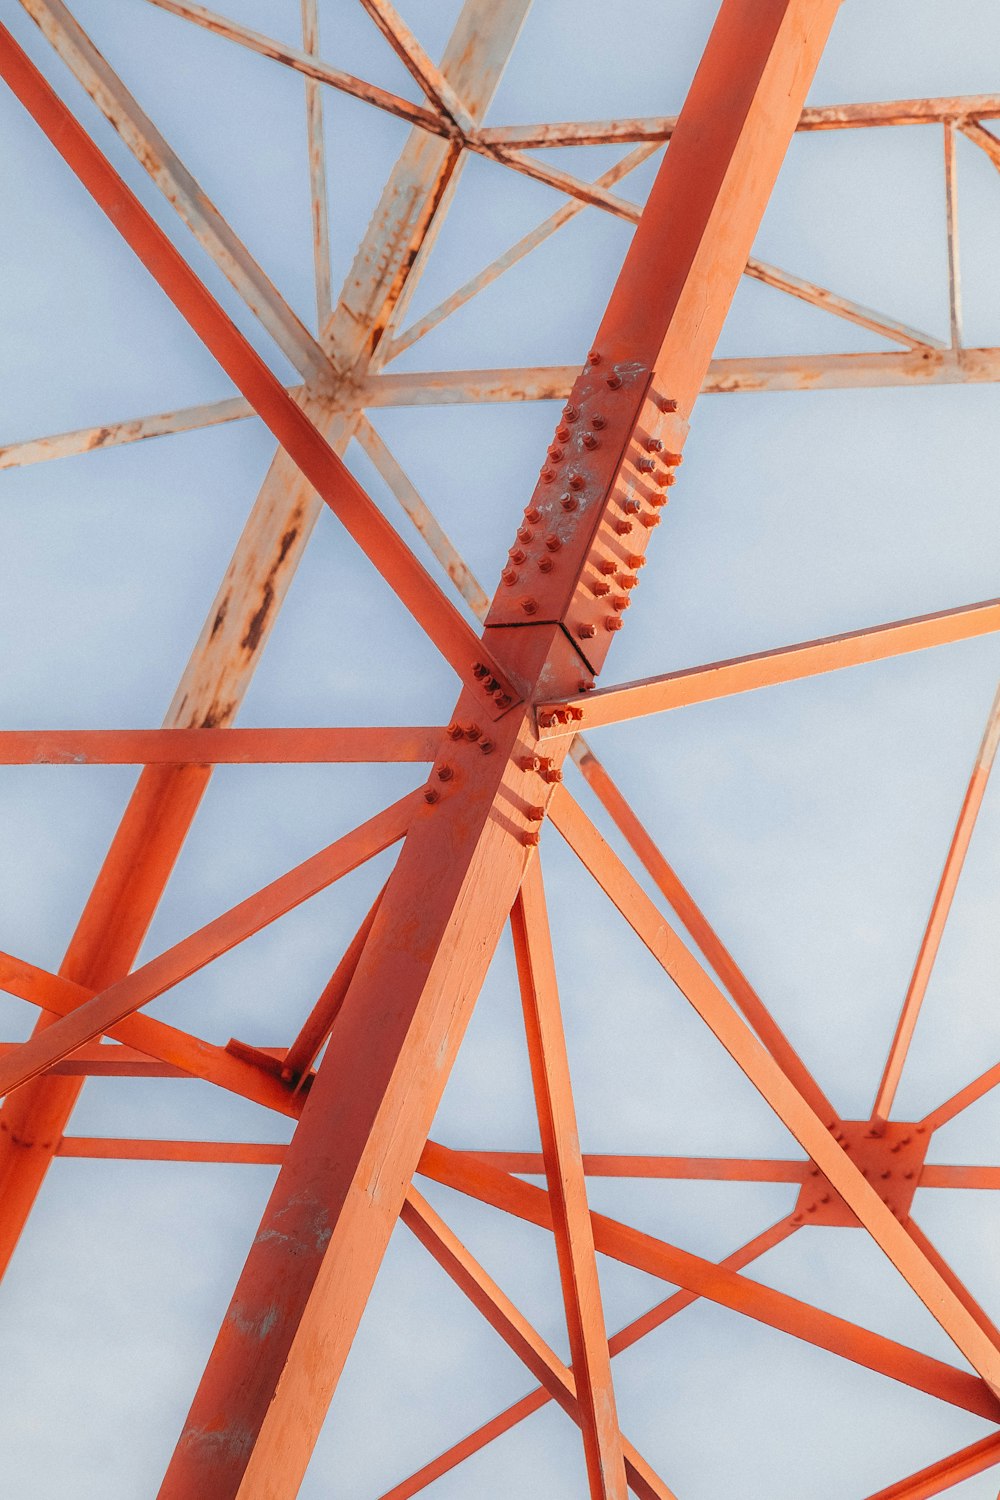 a close up of a metal structure against a blue sky